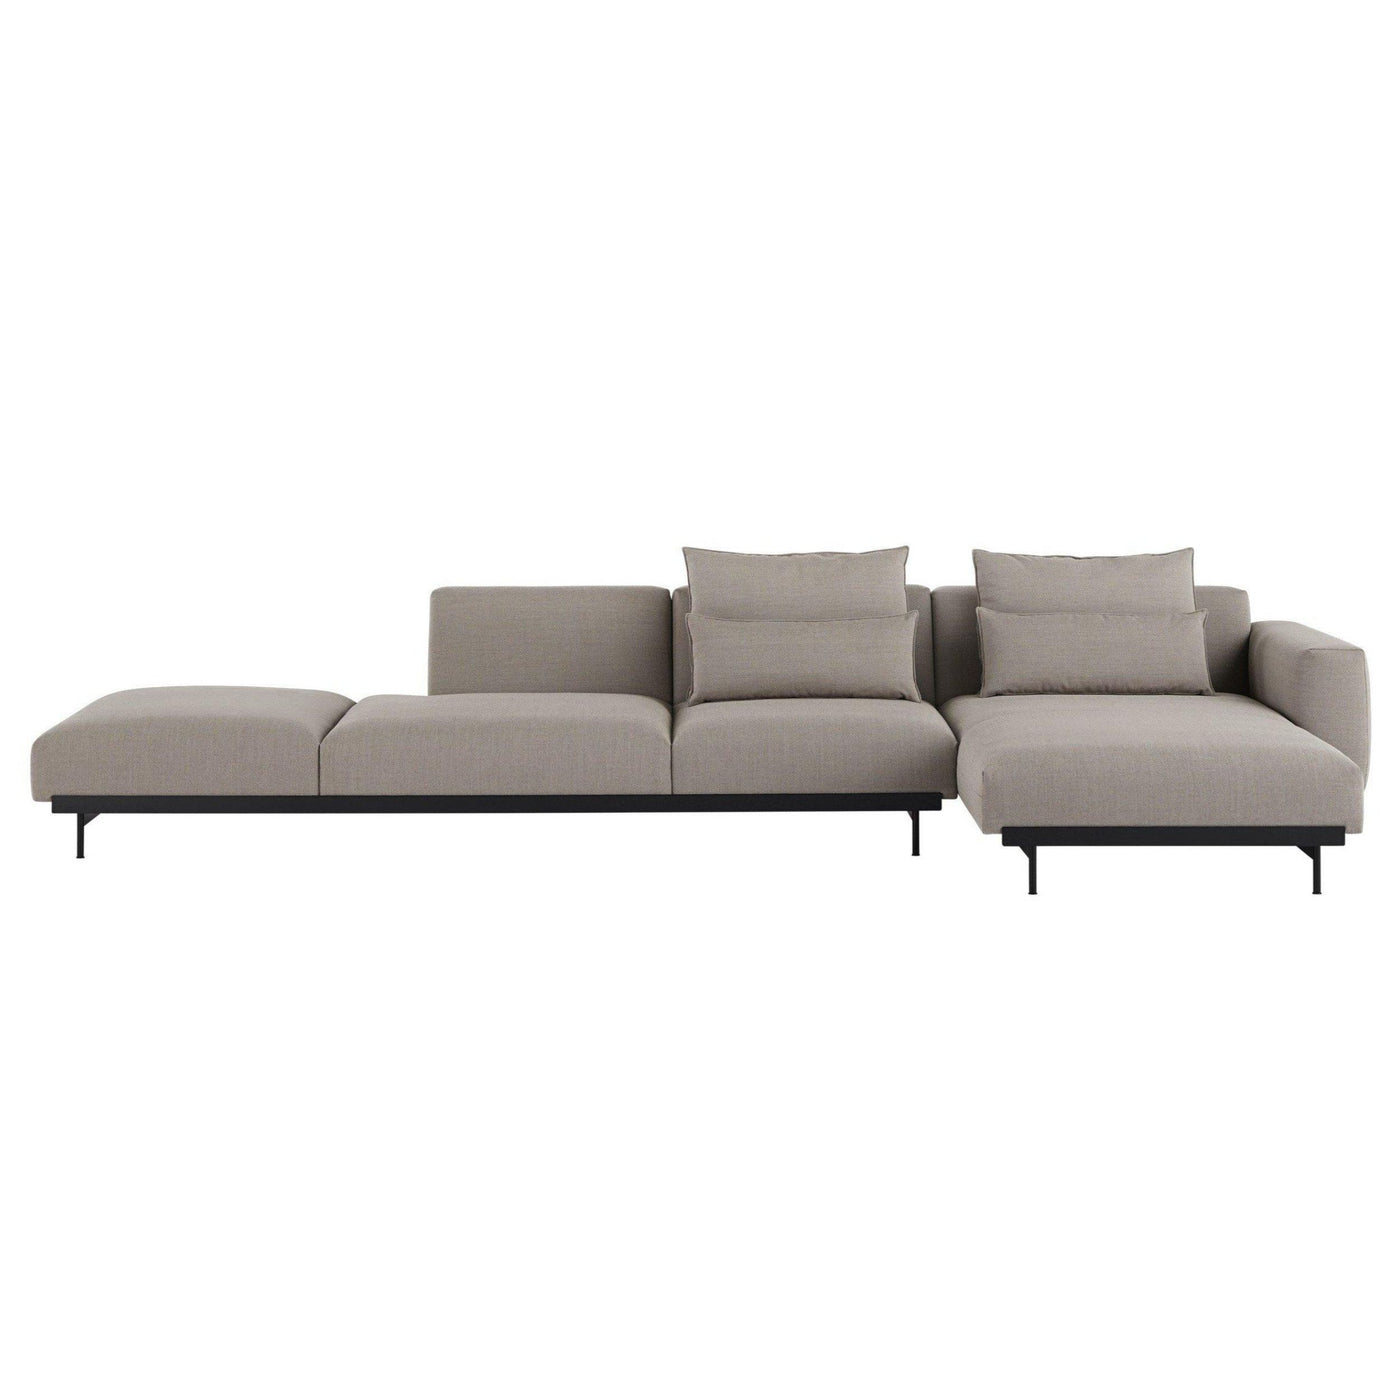 Muuto In Situ Modular 4 Seater Sofa configuration 4. Made to order from someday designs. #colour_fiord-262